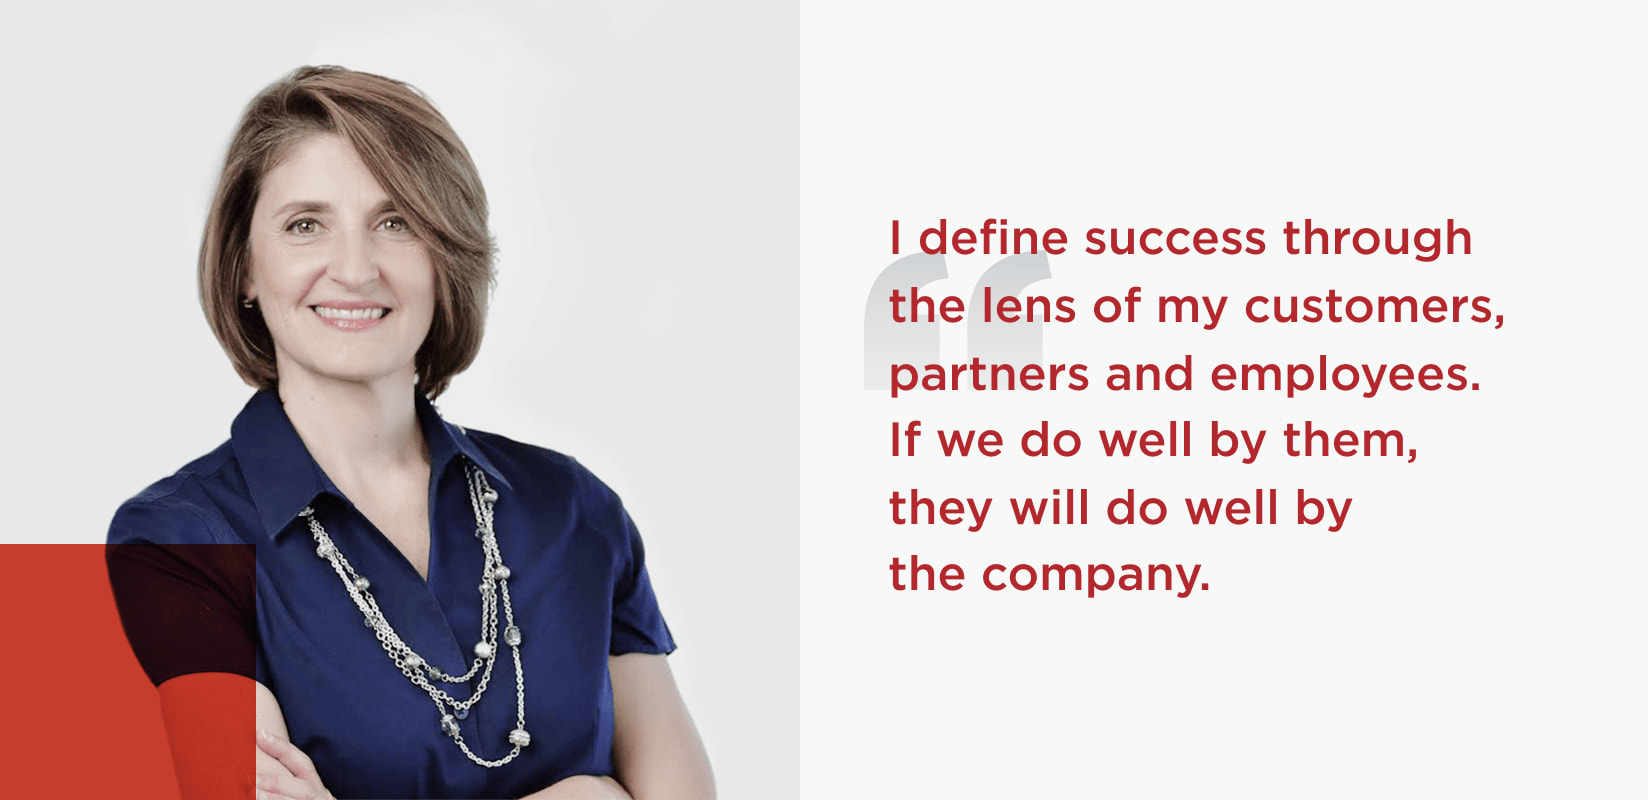 Decorative headshot of Ping Identity Chief Product Officer, Candace Worley, with the following quote 'I define success through the lens of my customers, partners and employees. If we do well by them, they will do well by the company.'